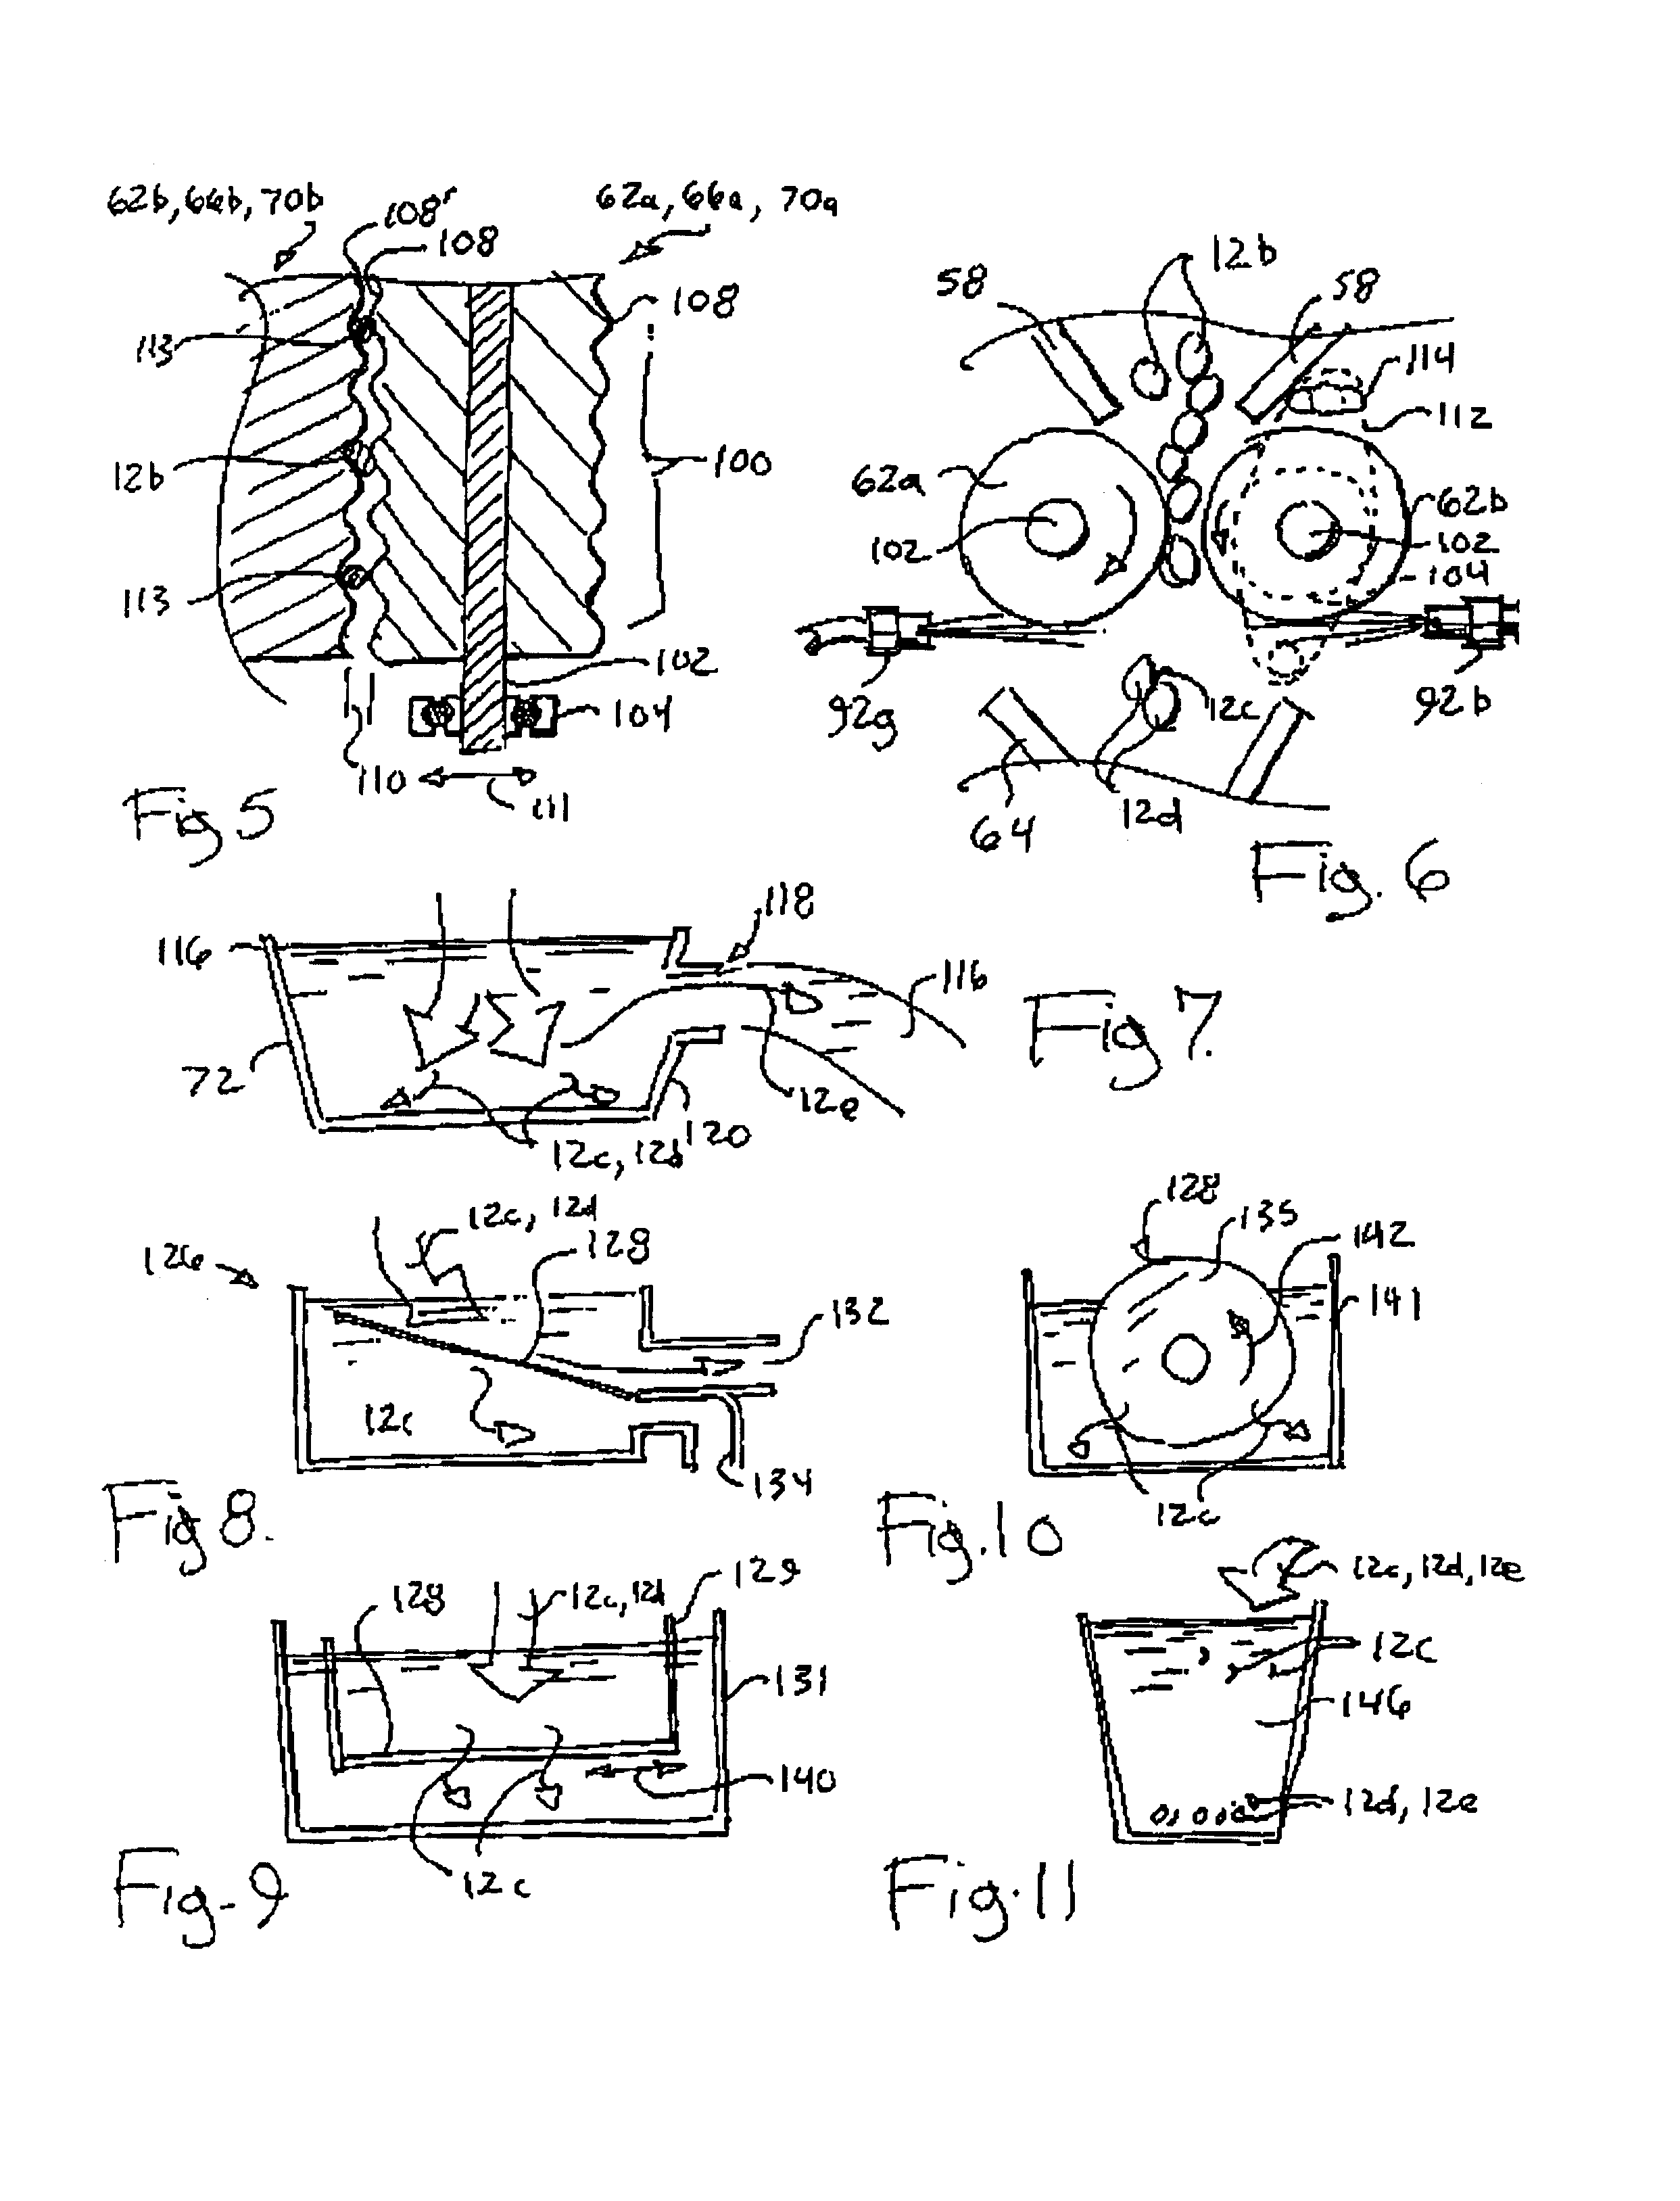 Method and apparatus for preparation of genetically transformable plant tissue